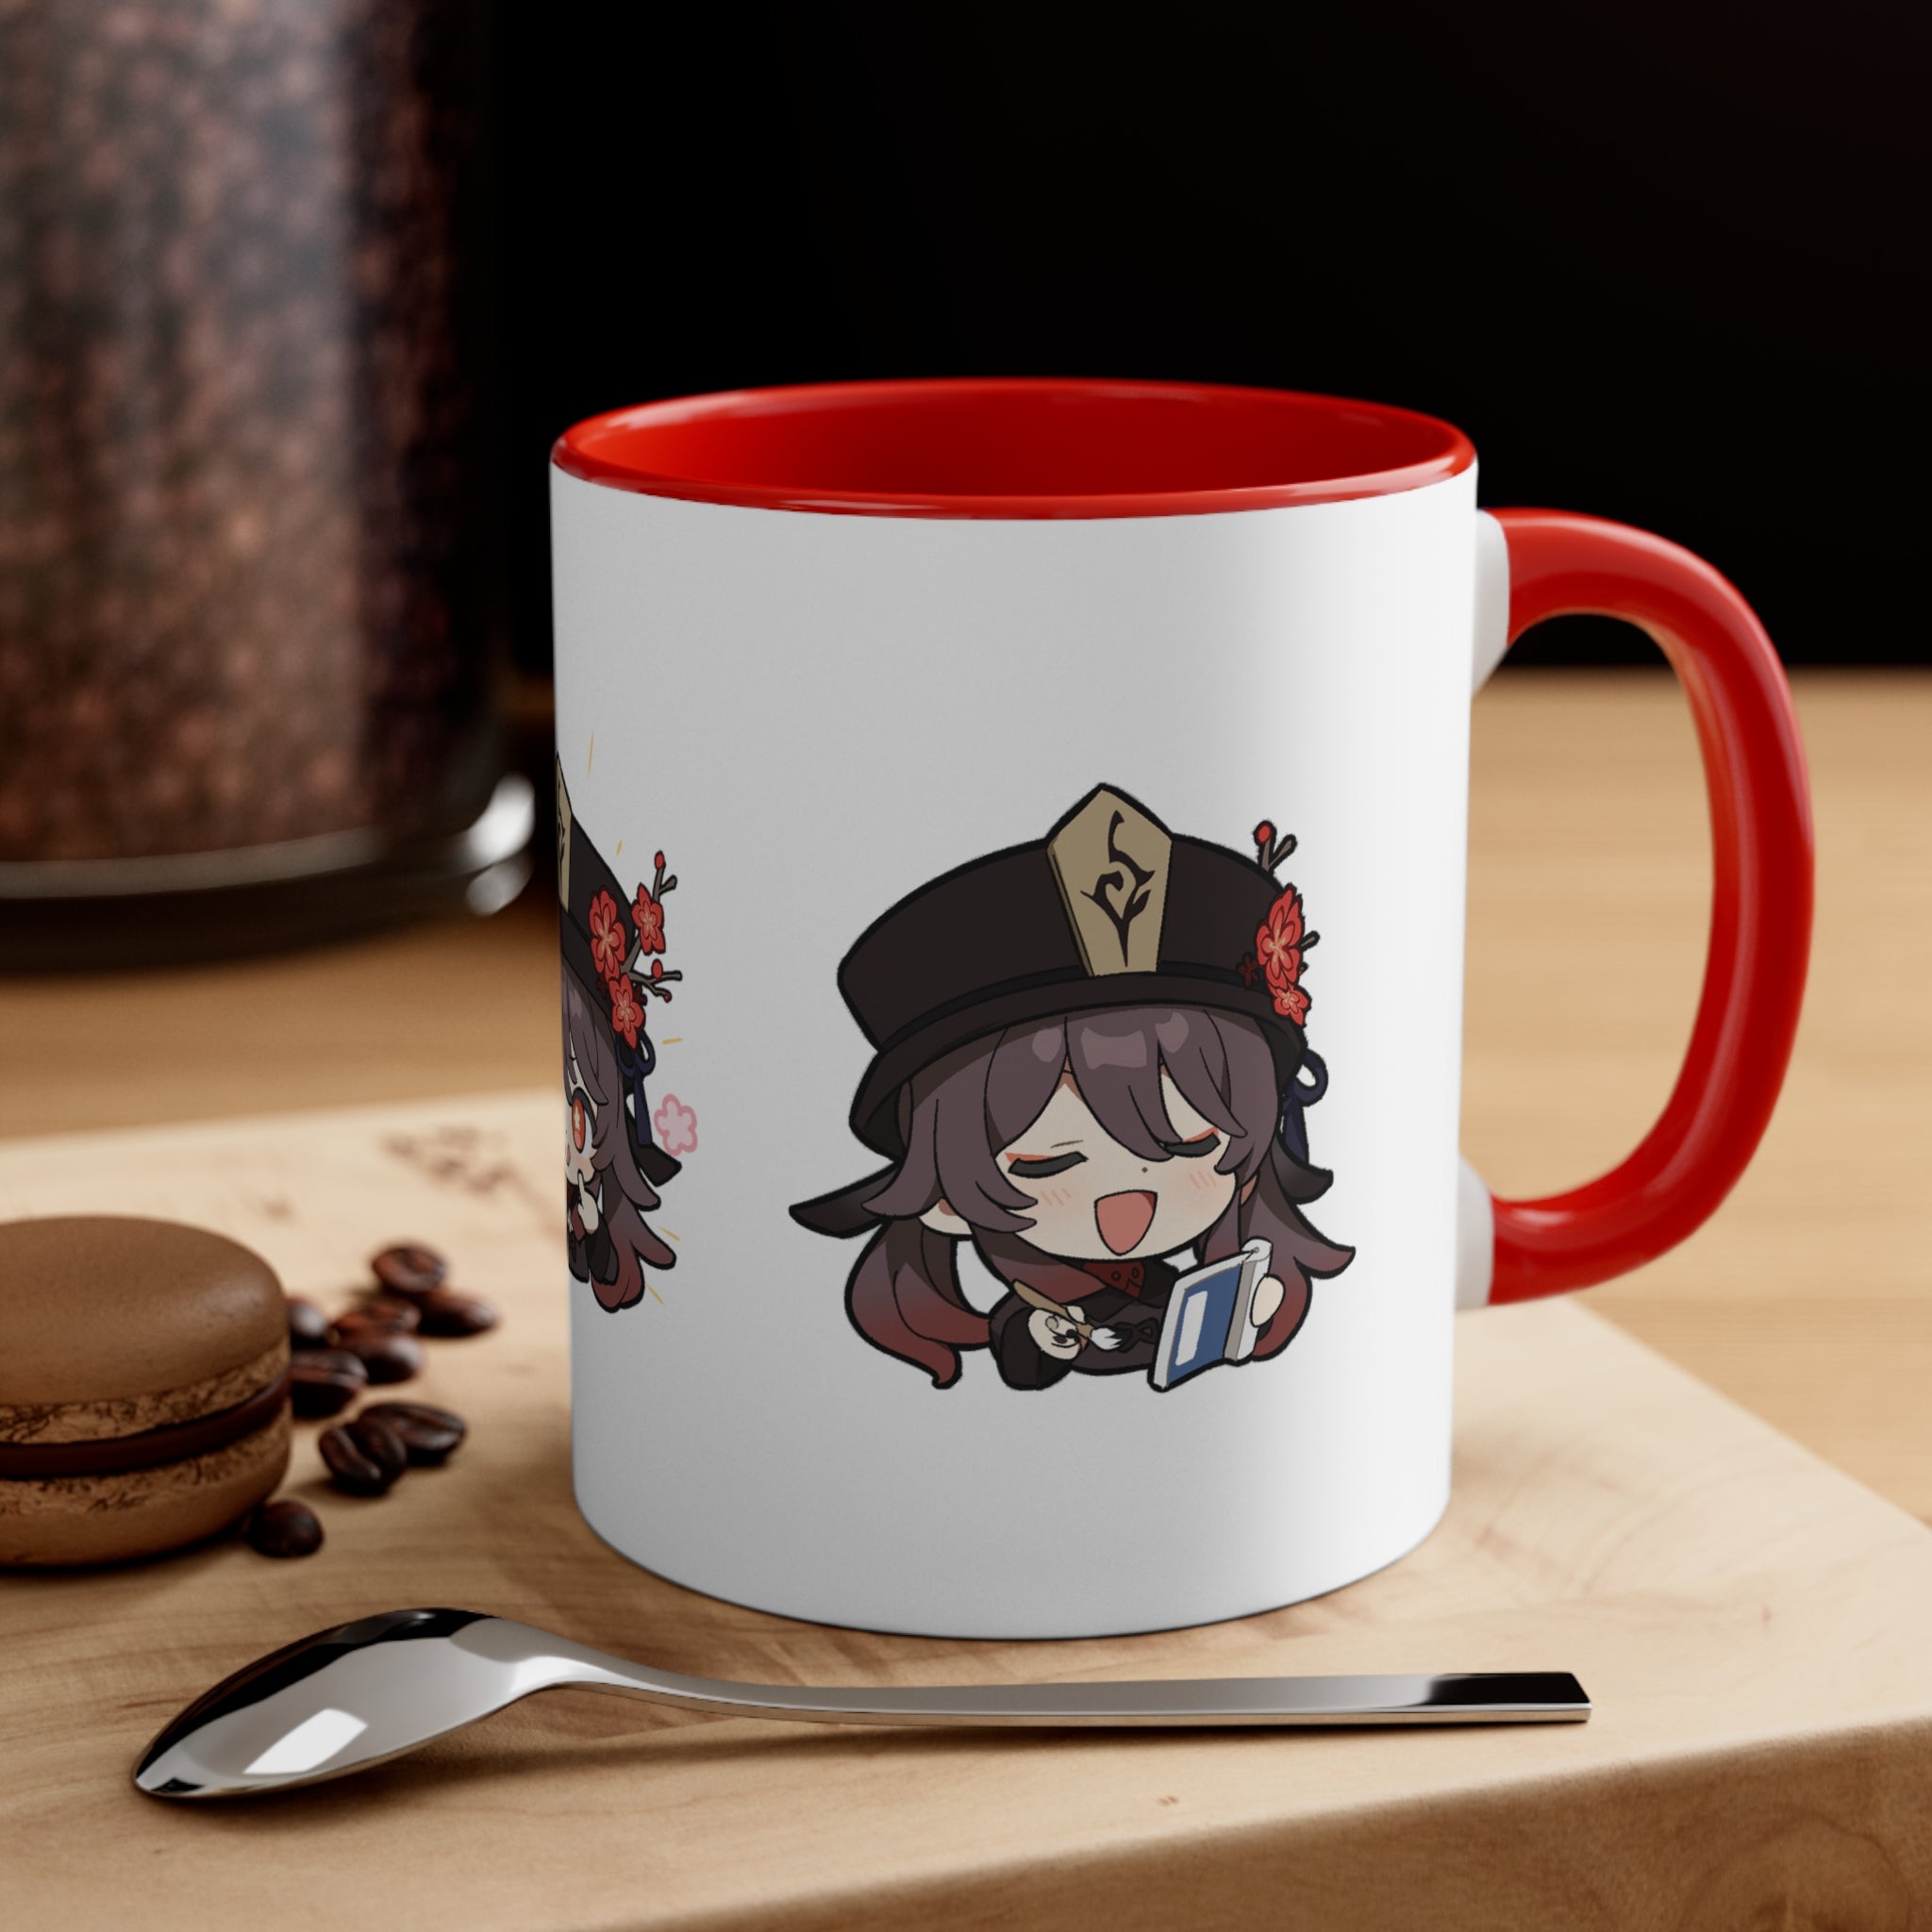 Hutao Genshin Impact Accent Coffee Mug, 11oz Cups Mugs Cup Gift For Gamer Gifts Game Anime Fanart Fan Birthday Valentine's Christmas